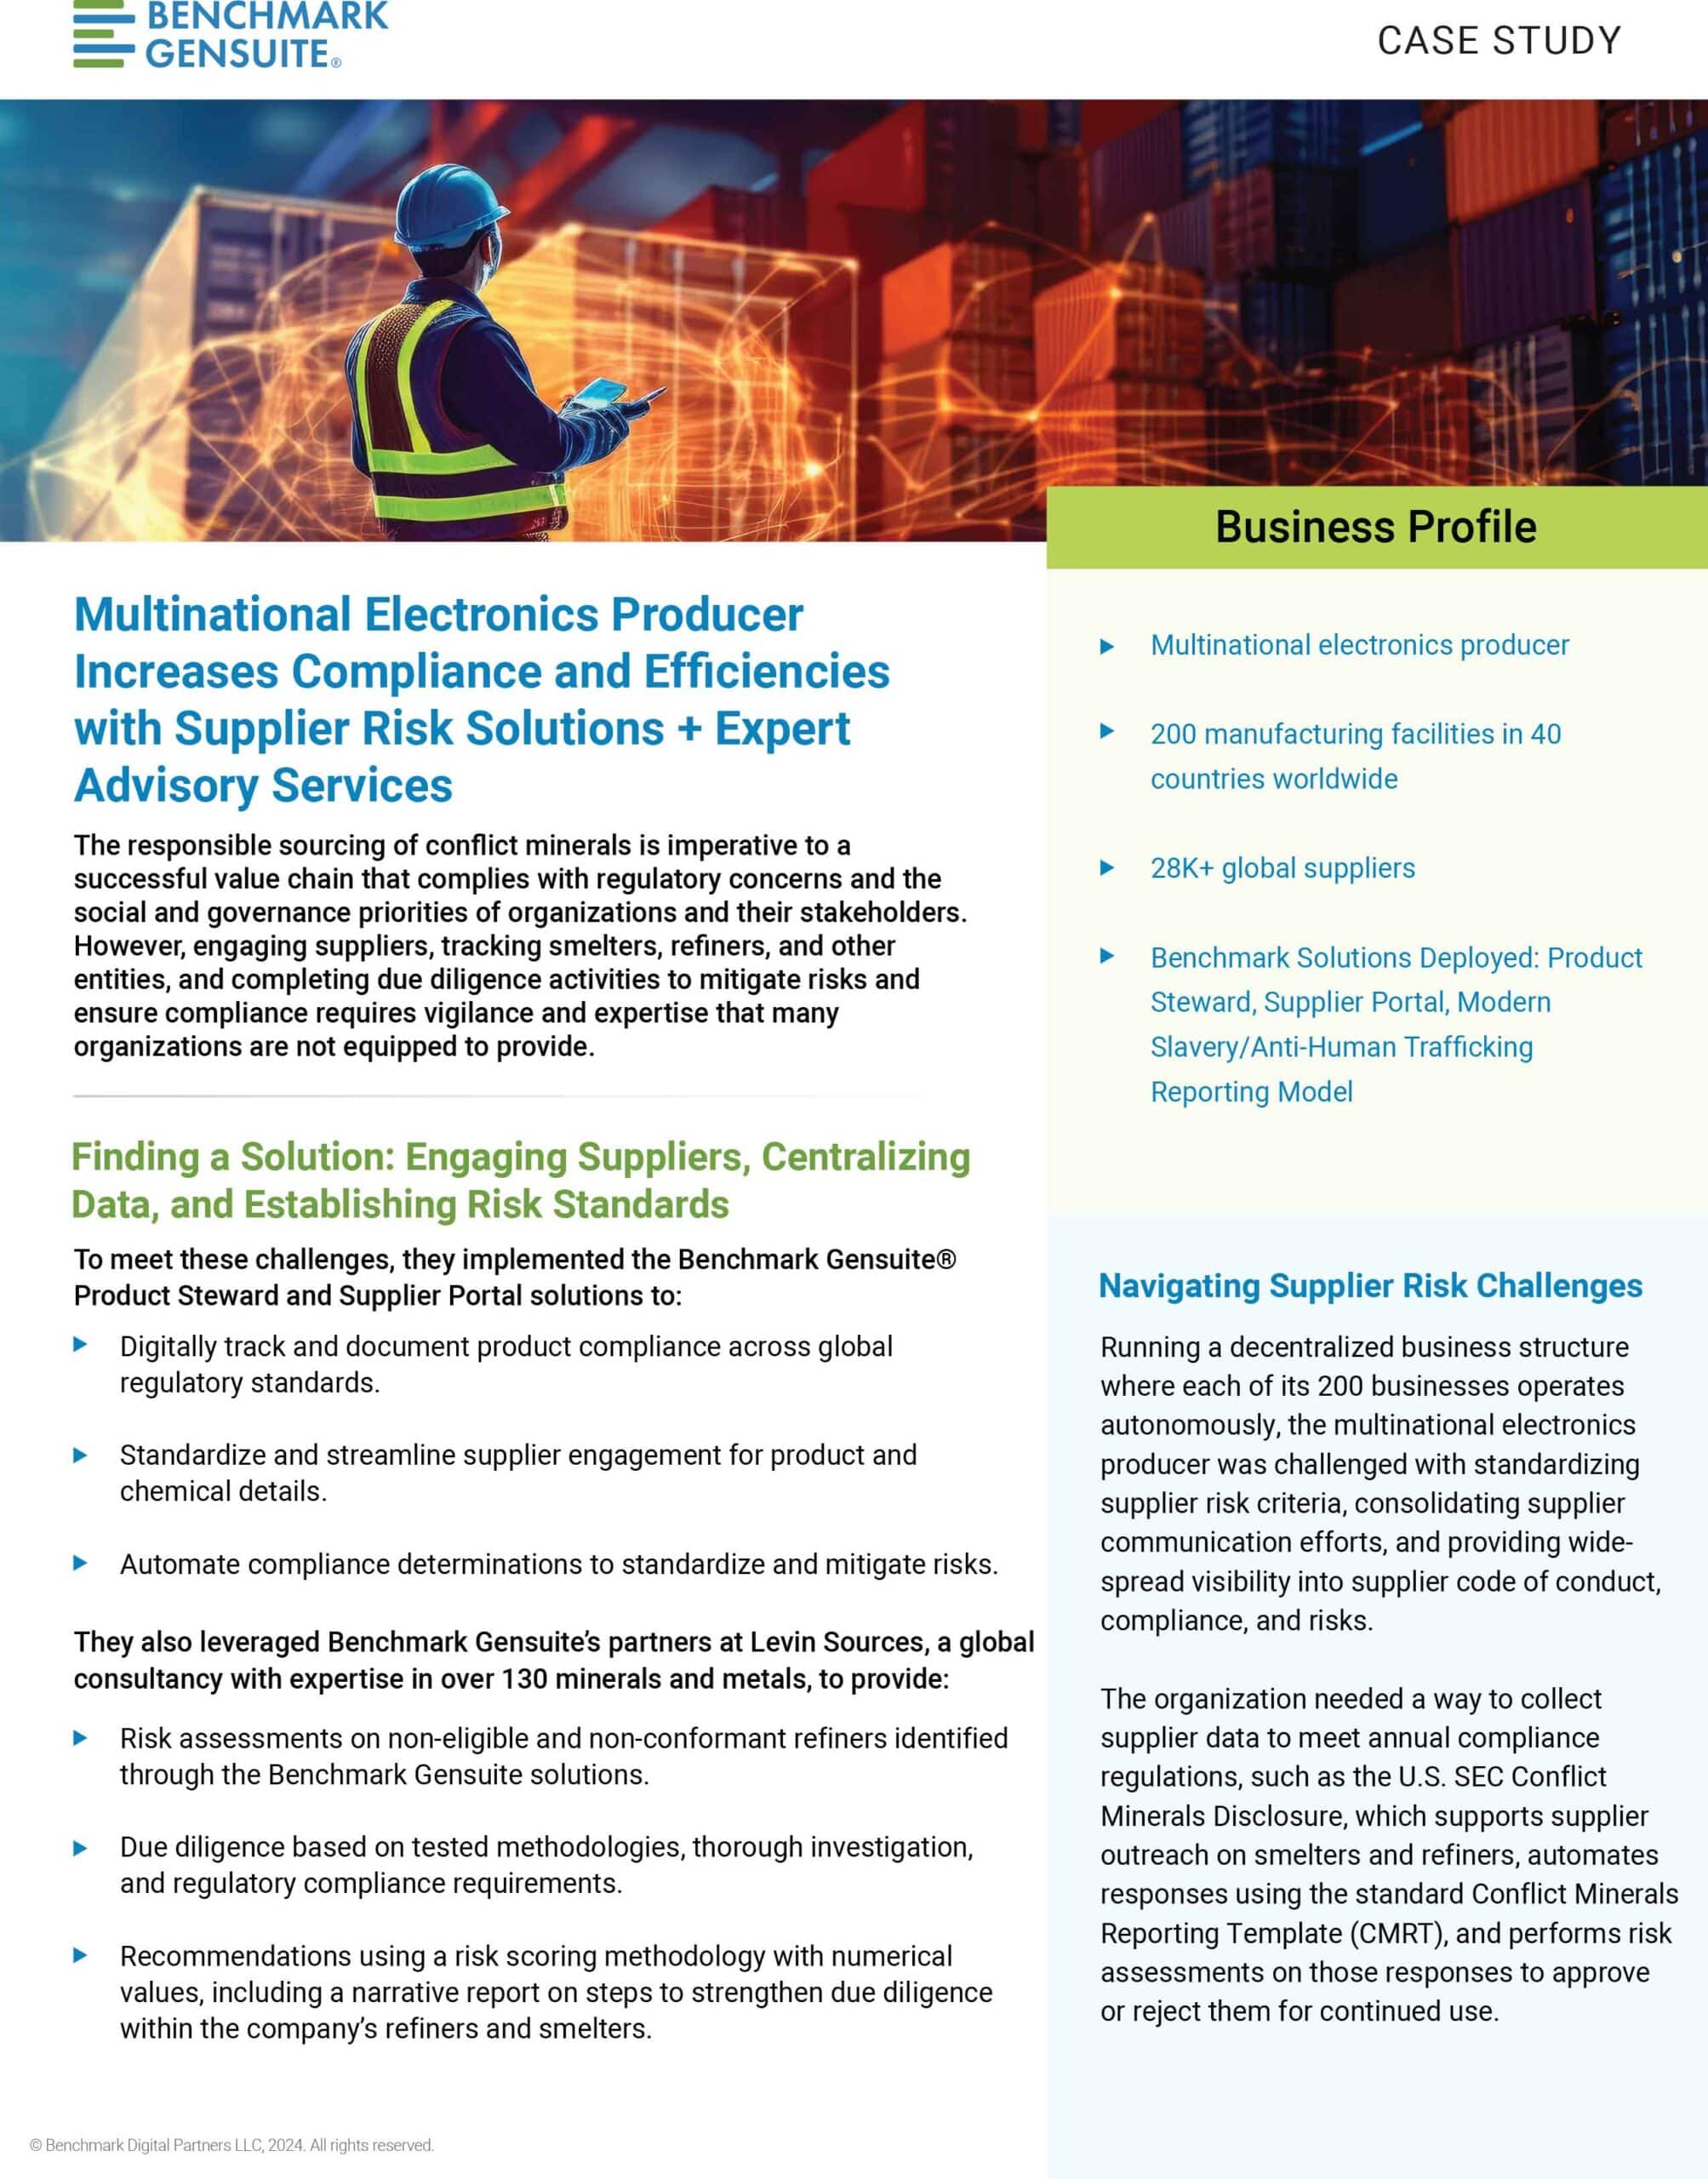 Multinational Electronics Producer Increases Compliance and Efficiencies with Supplier Risk Solutions + Expert Advisory Services